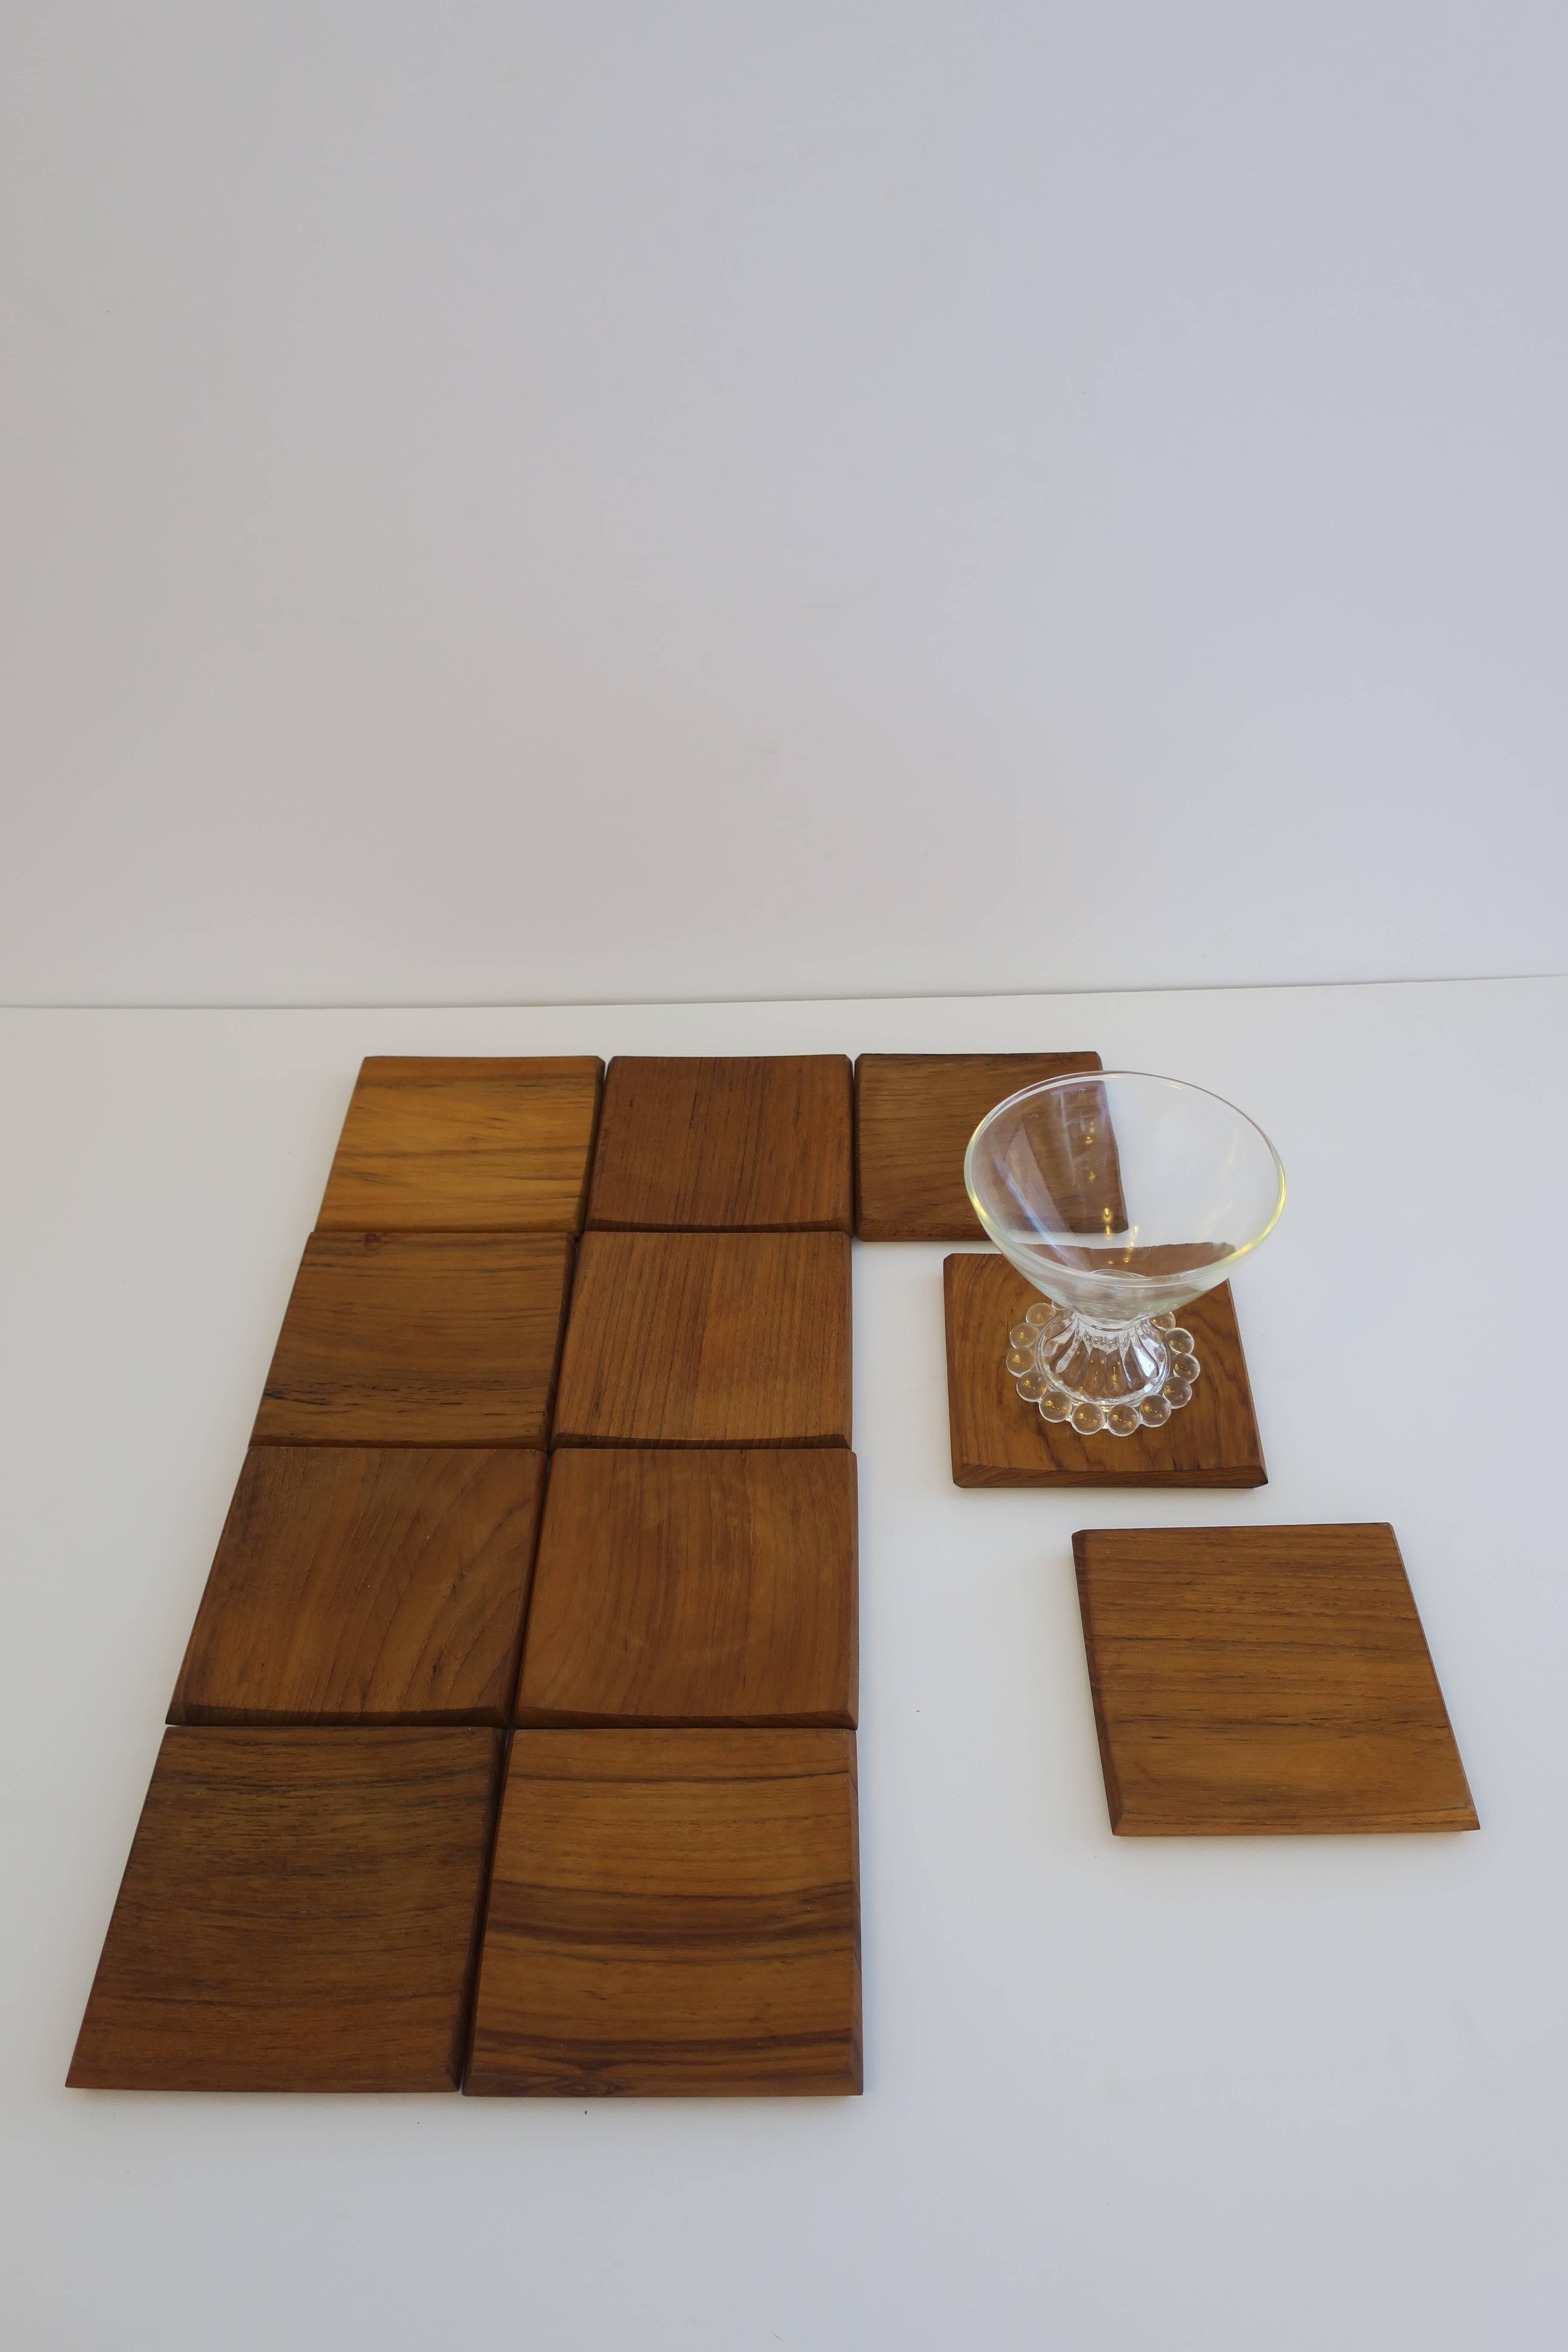 A beautiful set of 5 Scandinavian Modern teak coasters from Denmark. Dansk, made in Denmark as show in image #8 and #9. Two sets of 5 available. 

Each coaster measures: 3.75 in. square. 

Set available here online. By request, set can be made